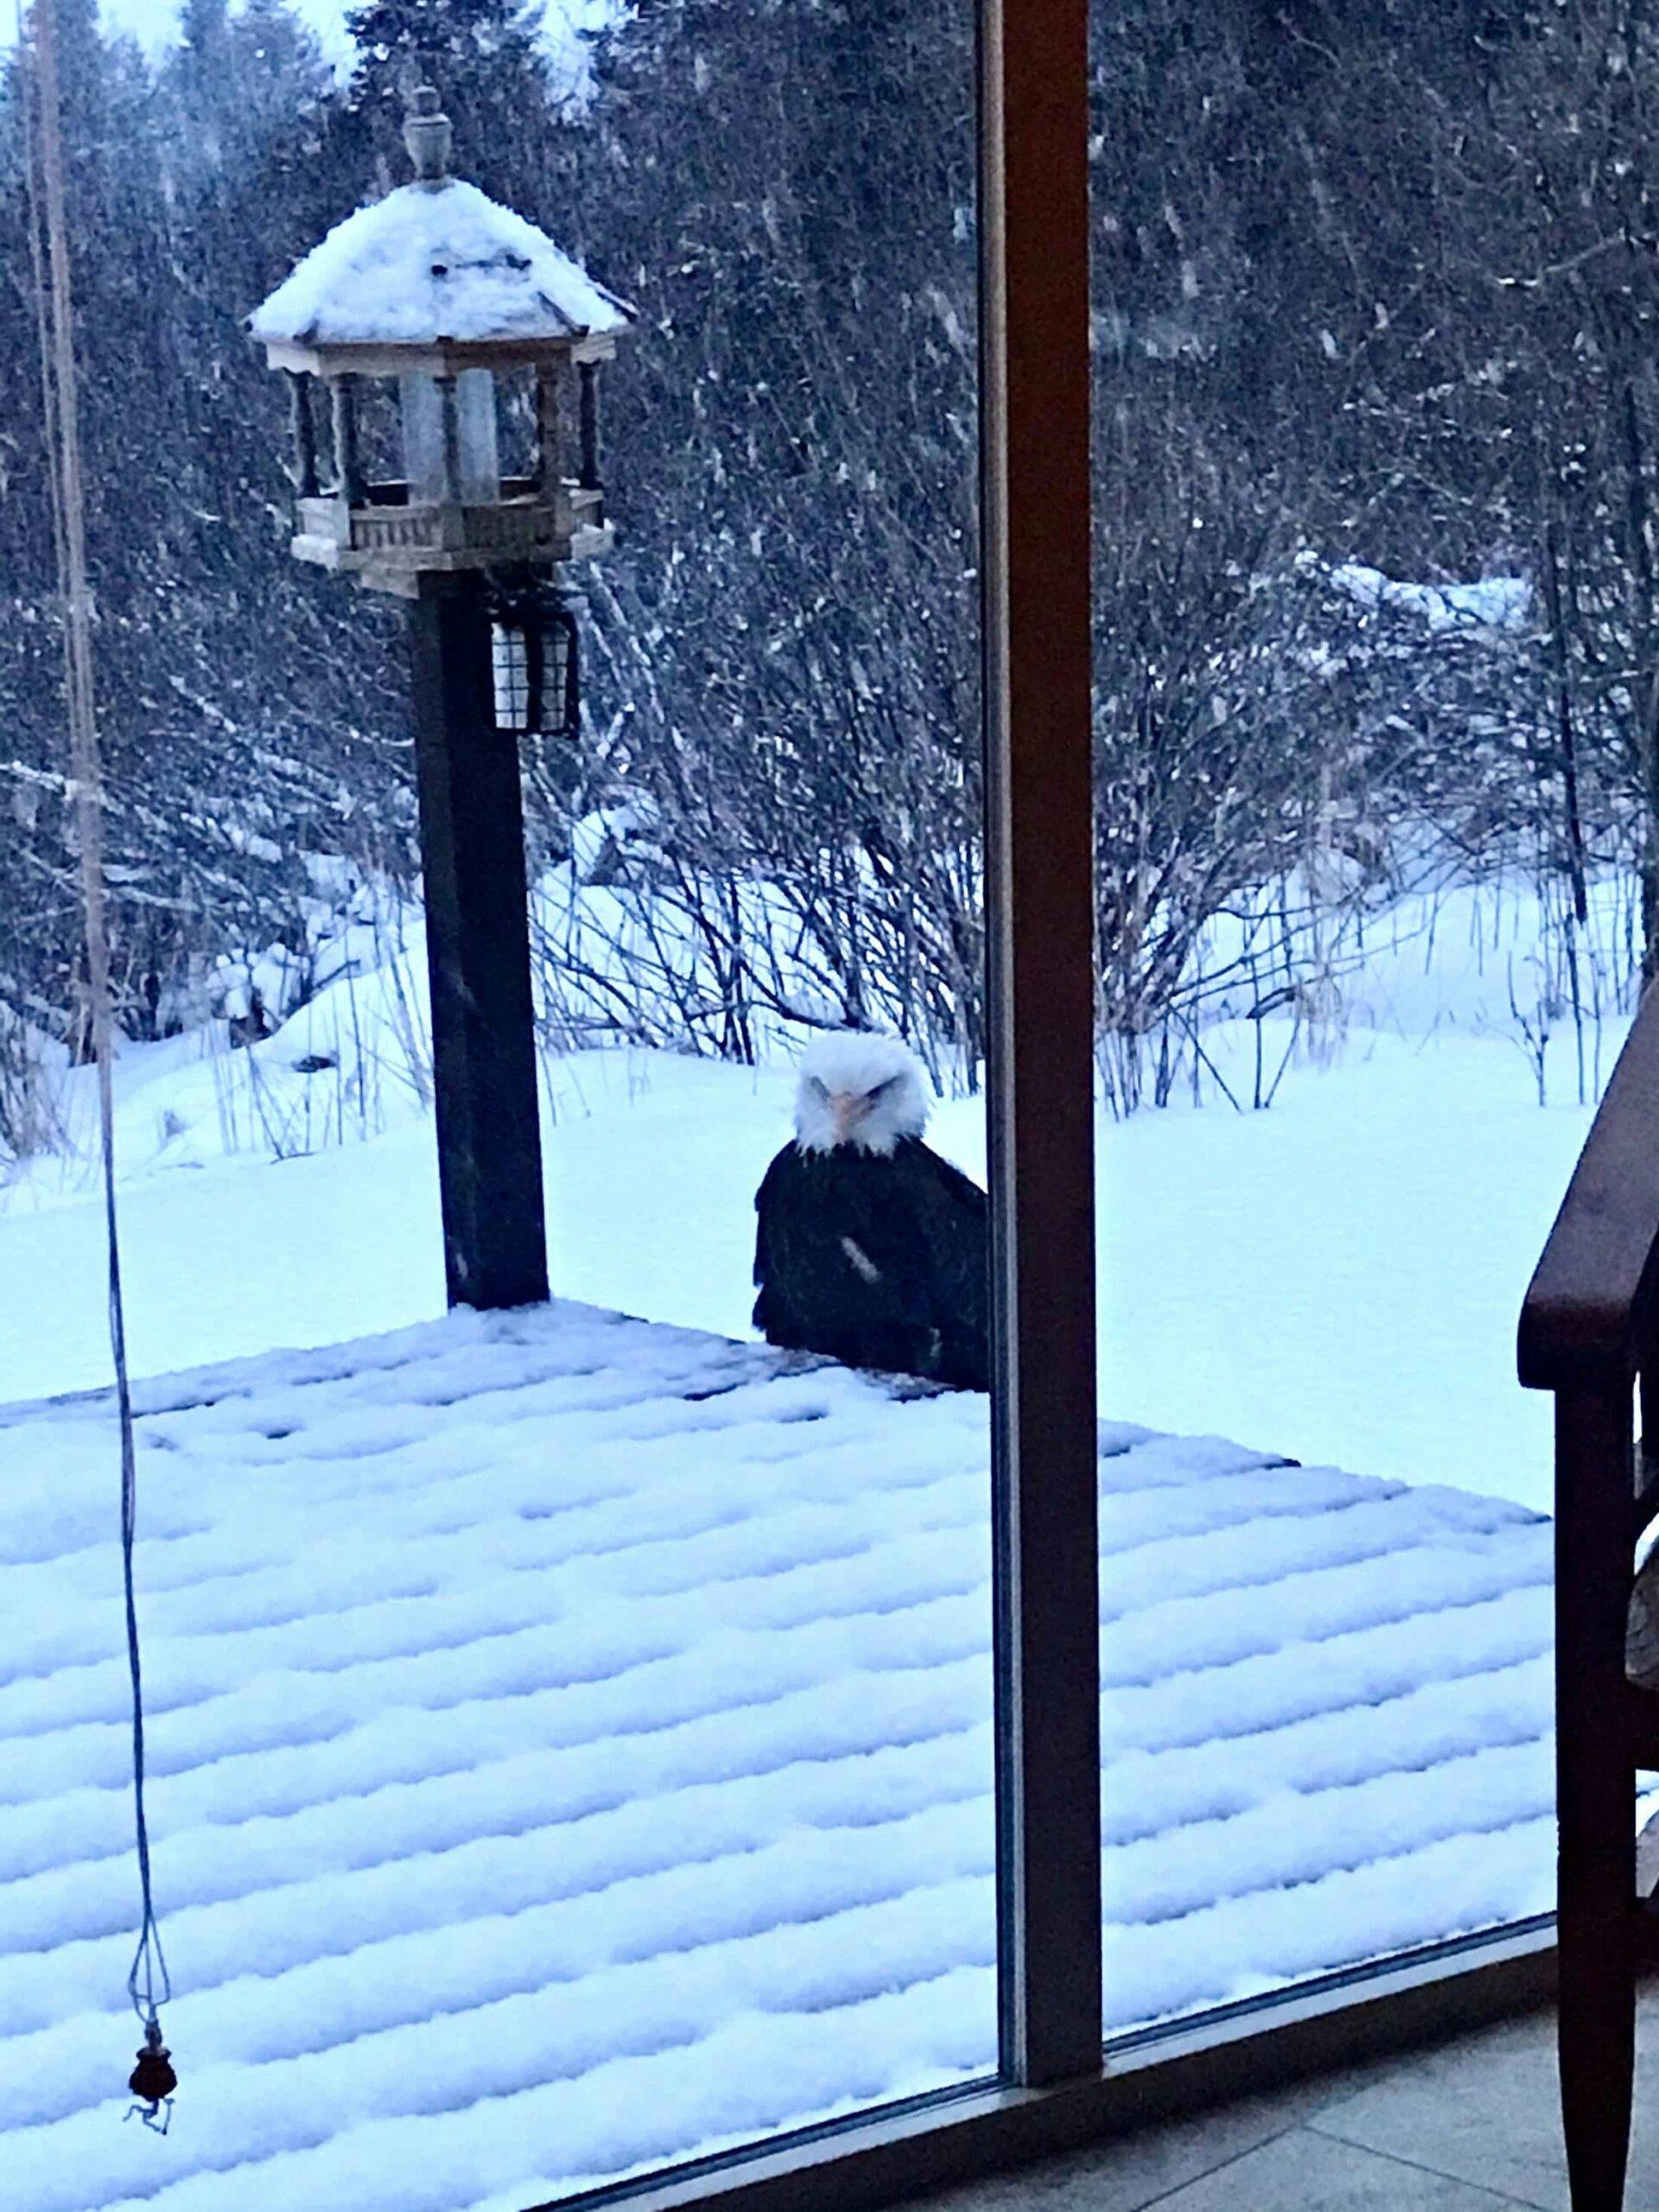 Back deck of a house with freshly fallen snow and a single hawk perched on the edge